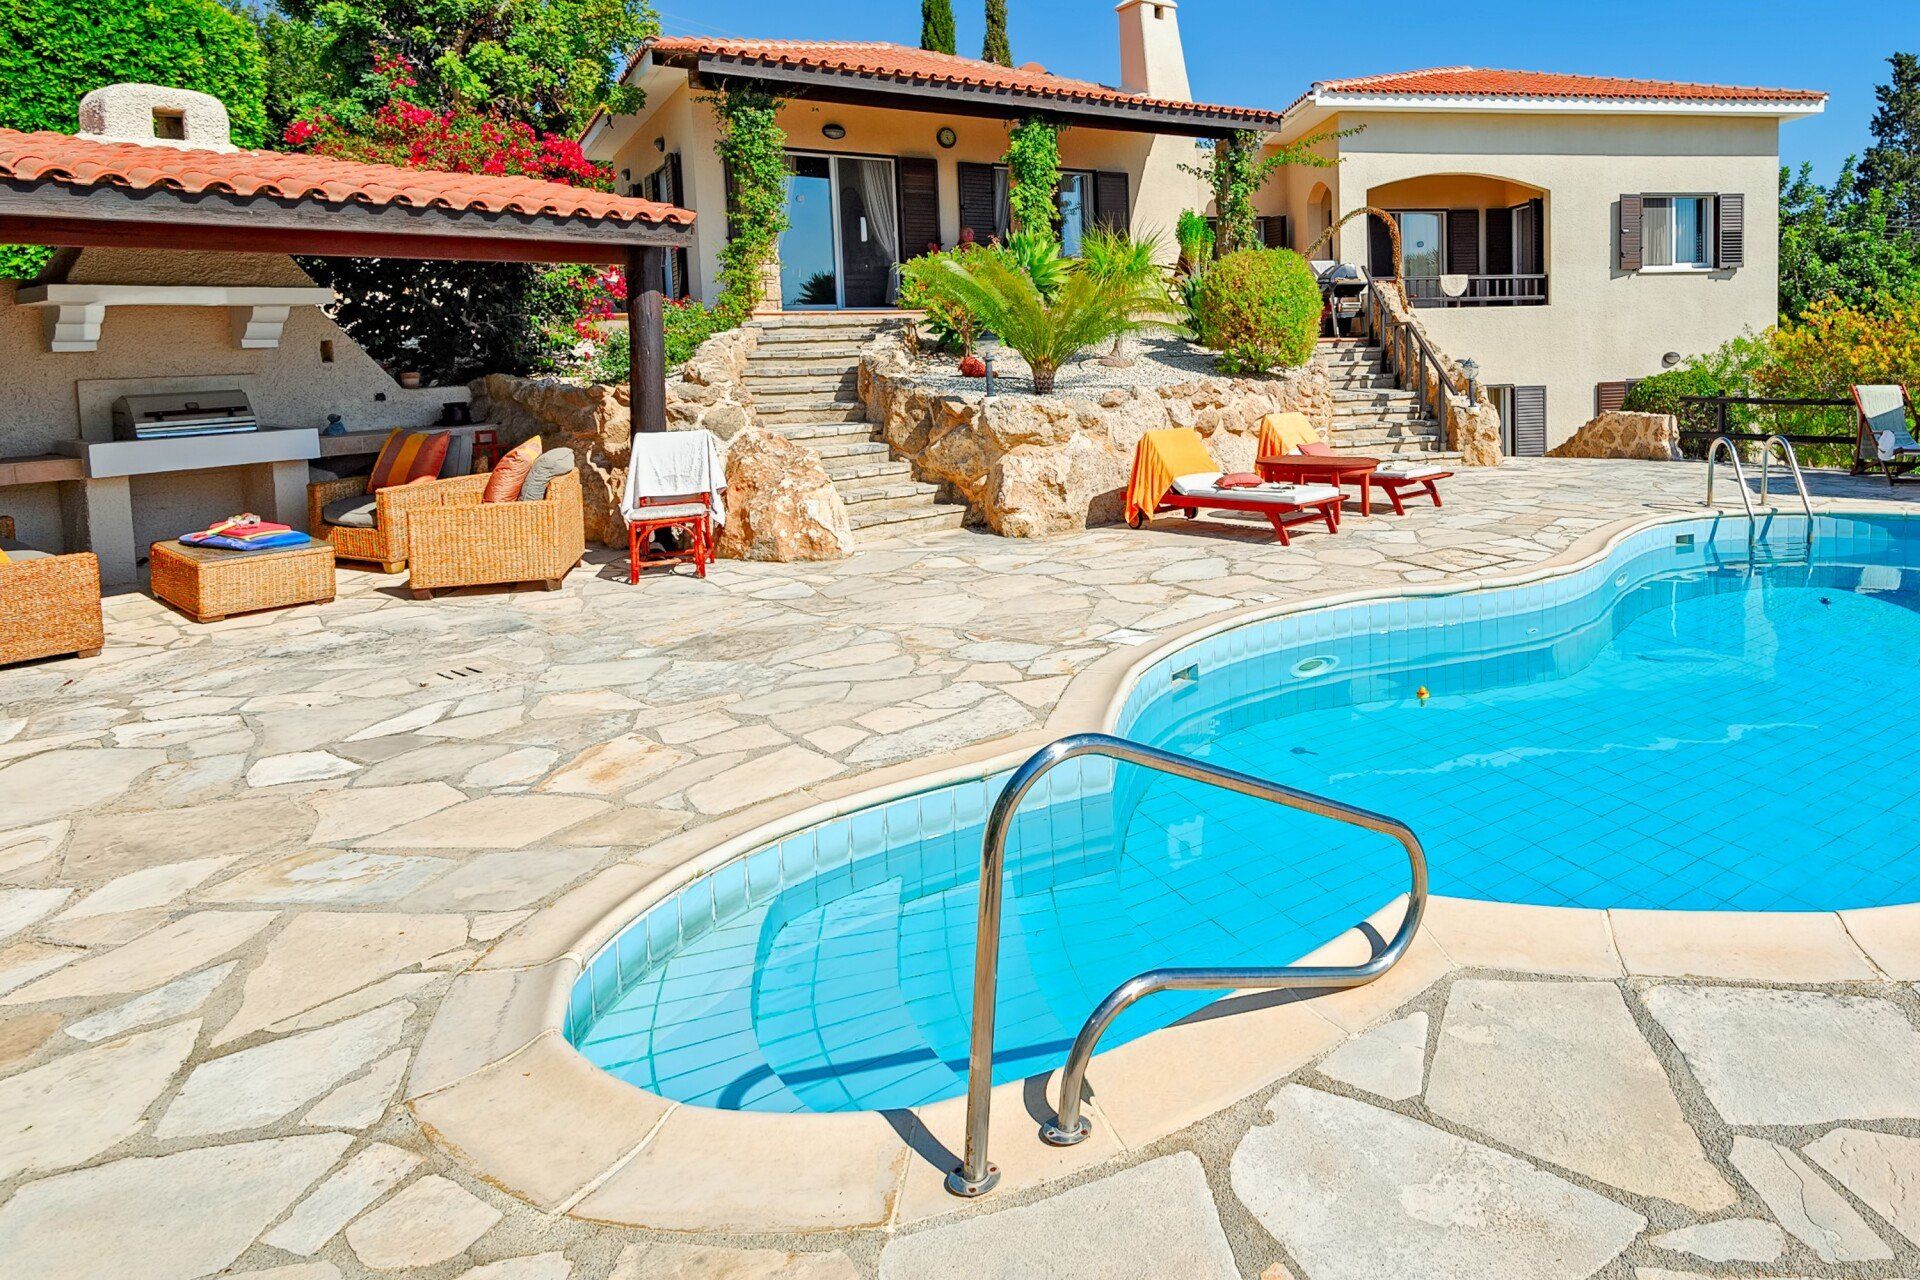 How to Take Care of Your Outdoor Stone Floors: A Maintenance Guide